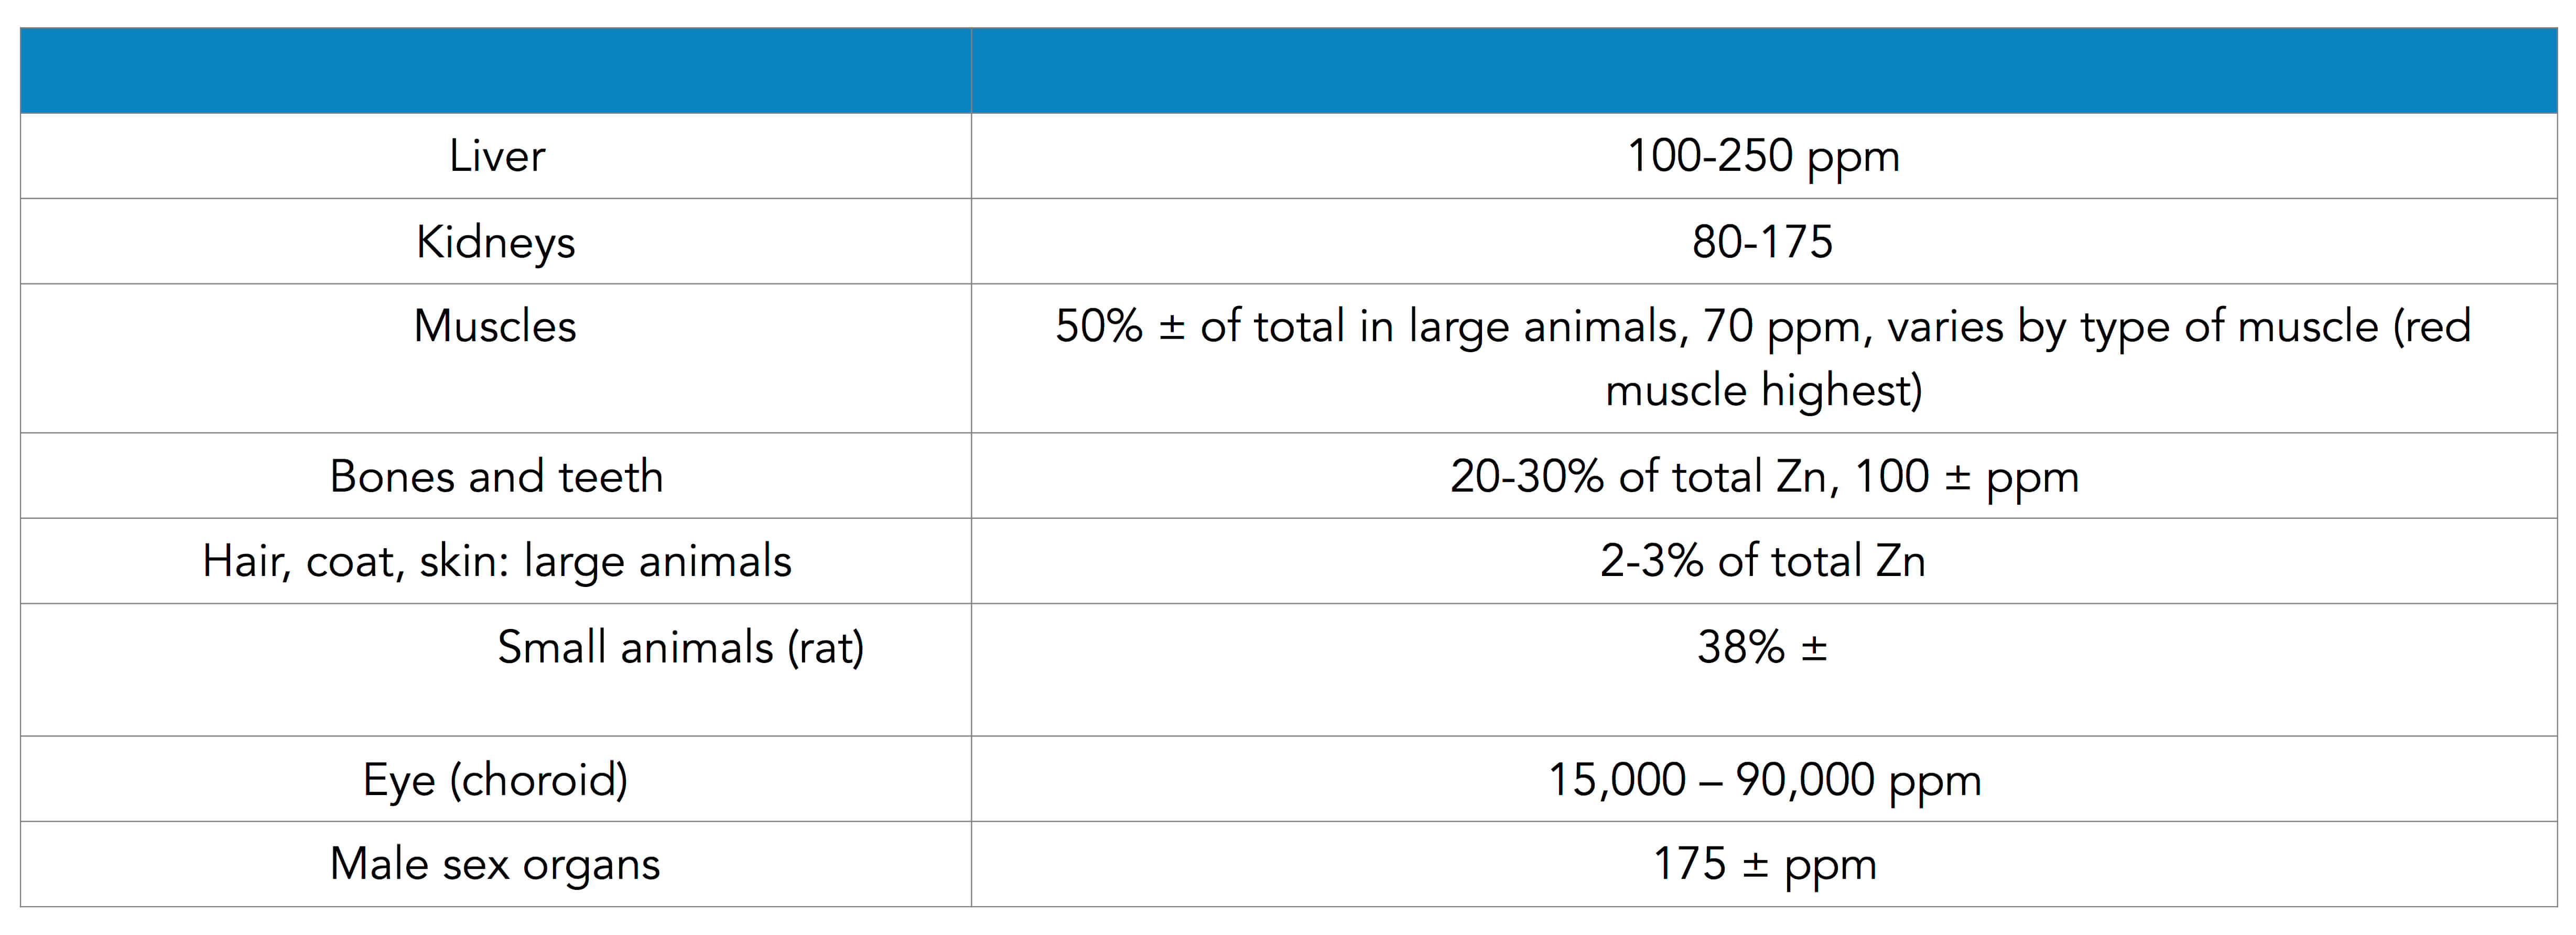 Table 1: Where the Zinc Is Found In Prey Animals From Trace Elements in Human and Animal Nutrition, 5th edition, vol. 1. Walter Mertz, editor.     Liver 100-250 ppm Kidneys 80-175 Muscles 50% ± of total in large animals, 70 ppm, varies by type of muscle (red muscle highest) Bones and teeth 20-30% of total Zn, 100 ± ppm Hair, coat, skin: large animals 2-3% of total Zn                              Small animals (rat) 38% ± Eye (choroid) 15,000 – 90,000 ppm Male sex organs 175 ± ppm